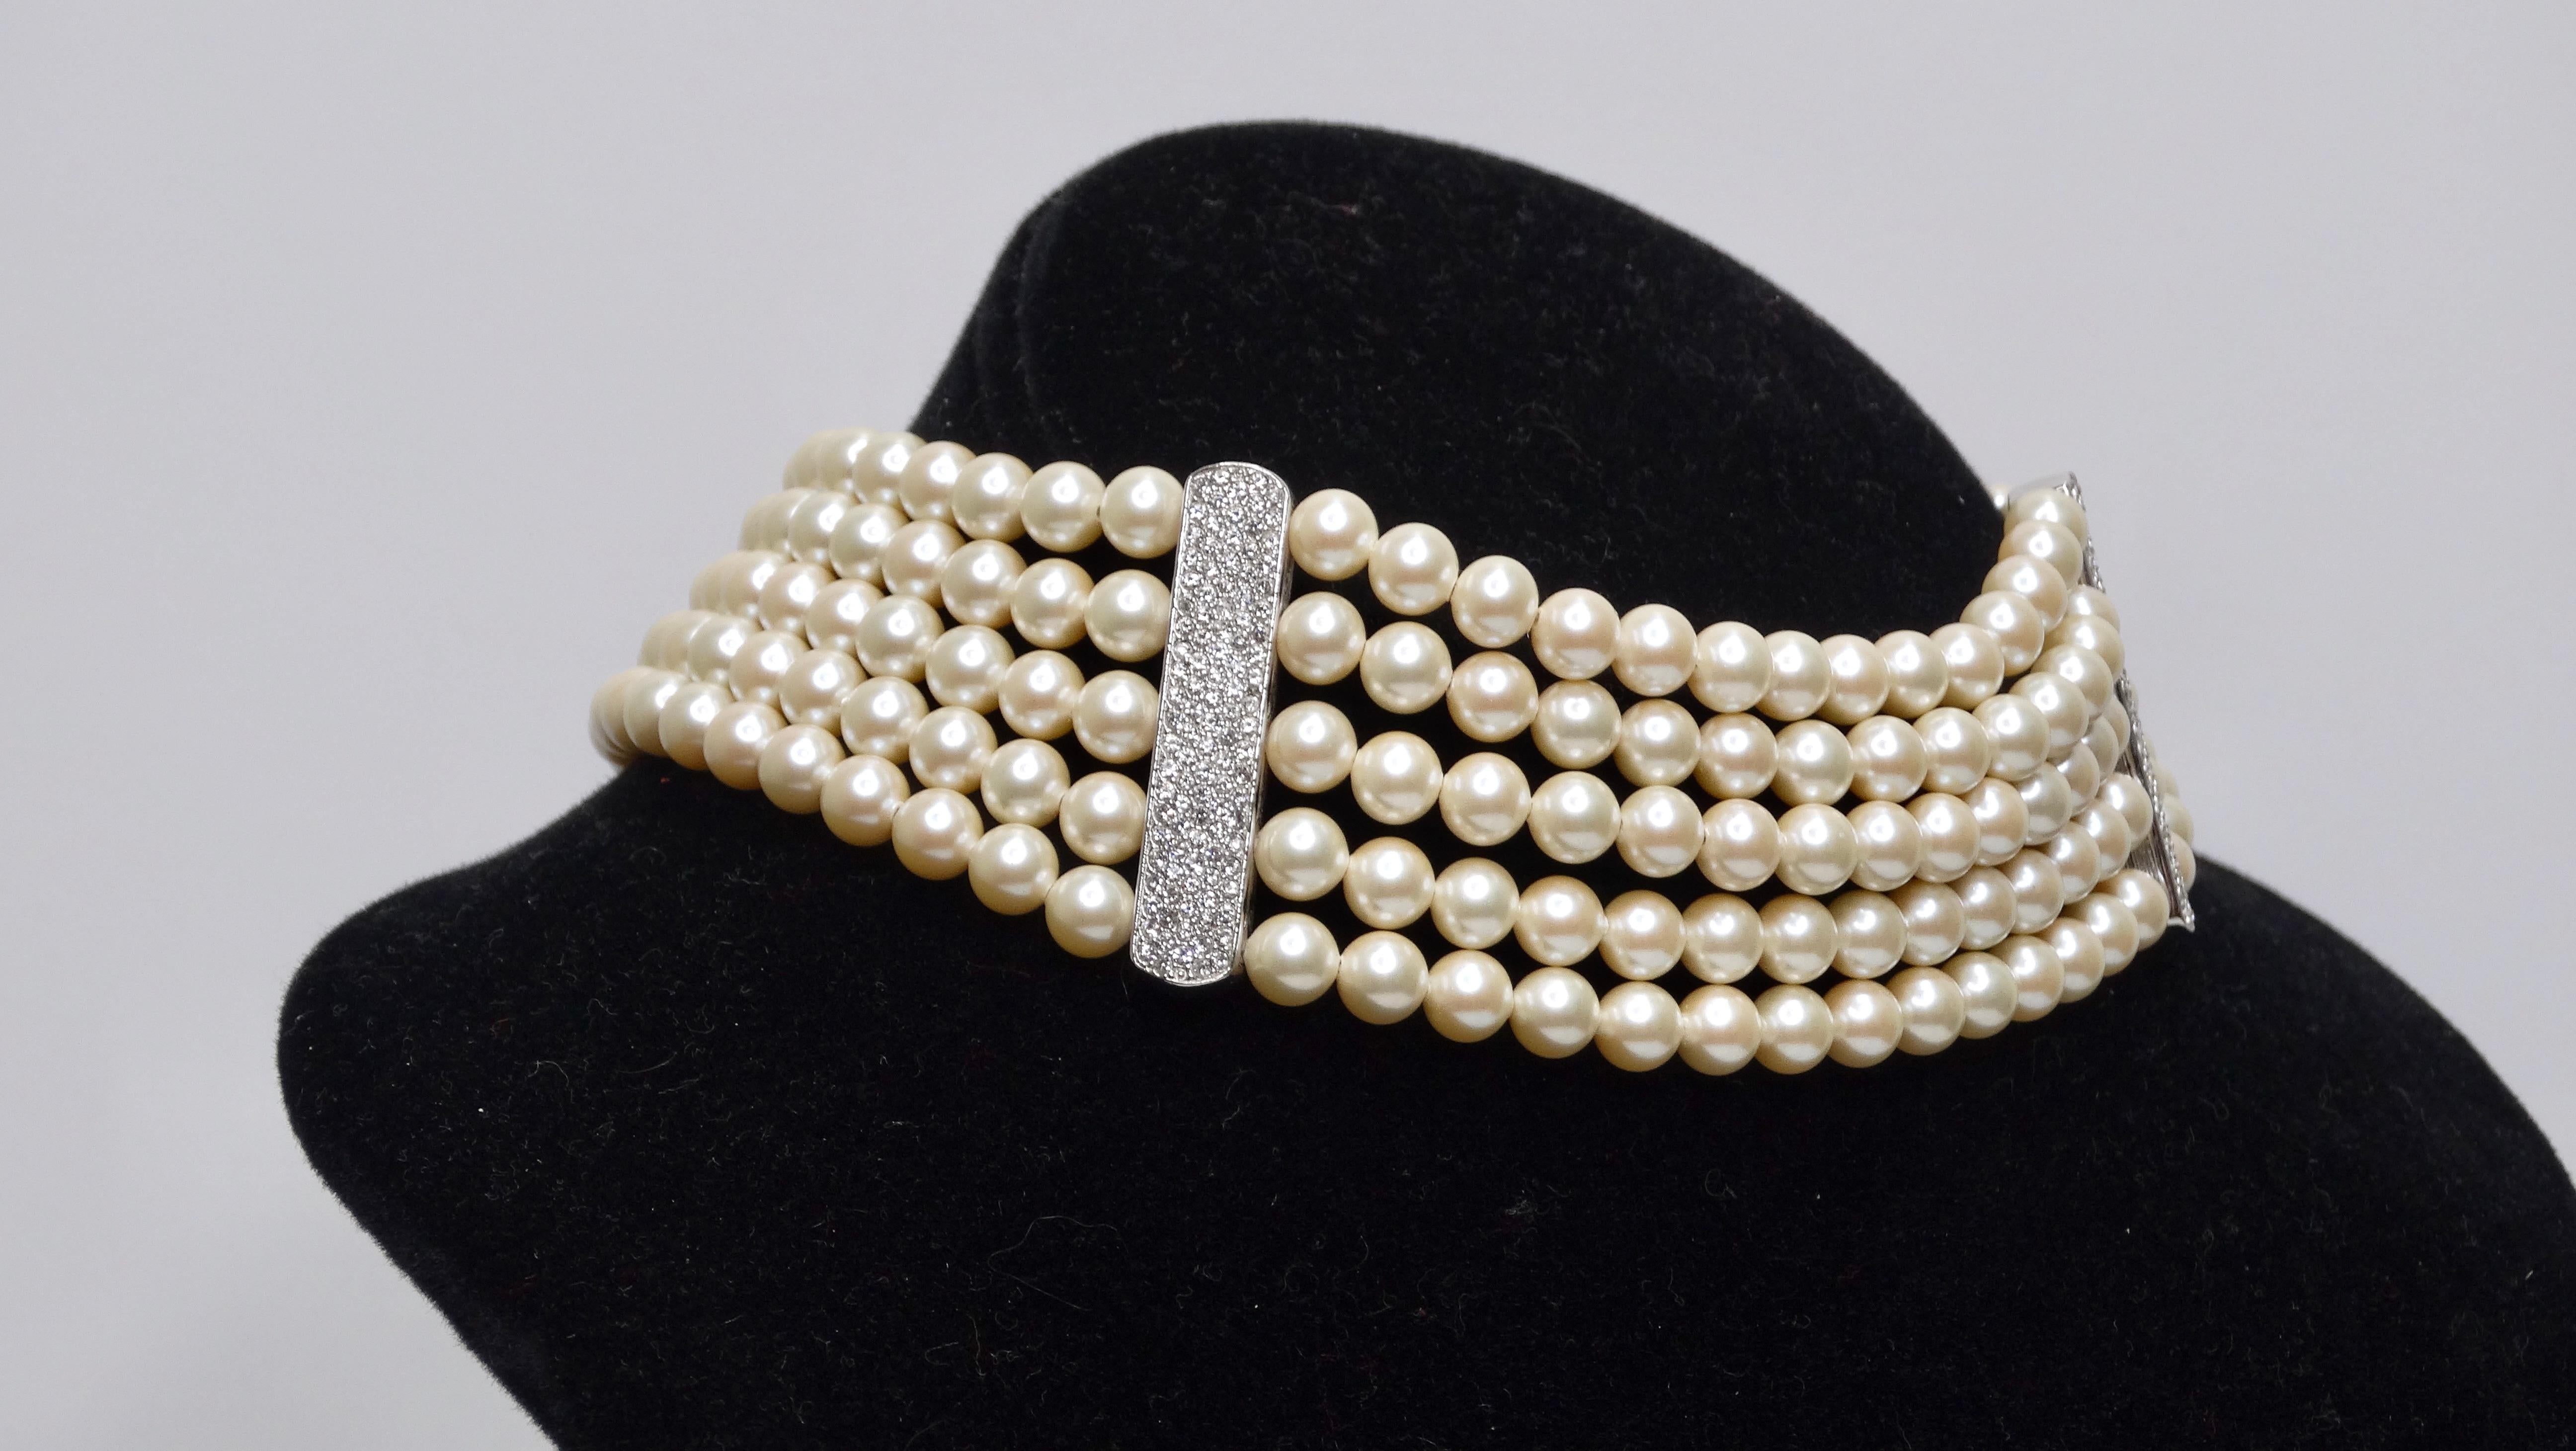 Look no further for your accessory for your next big event! This is a beautiful choker necklace has 5 rows of necklace beads, moulded soulpes elements, rhodium-plated and set with glass stones (crystal). In very good condition. There is a signature